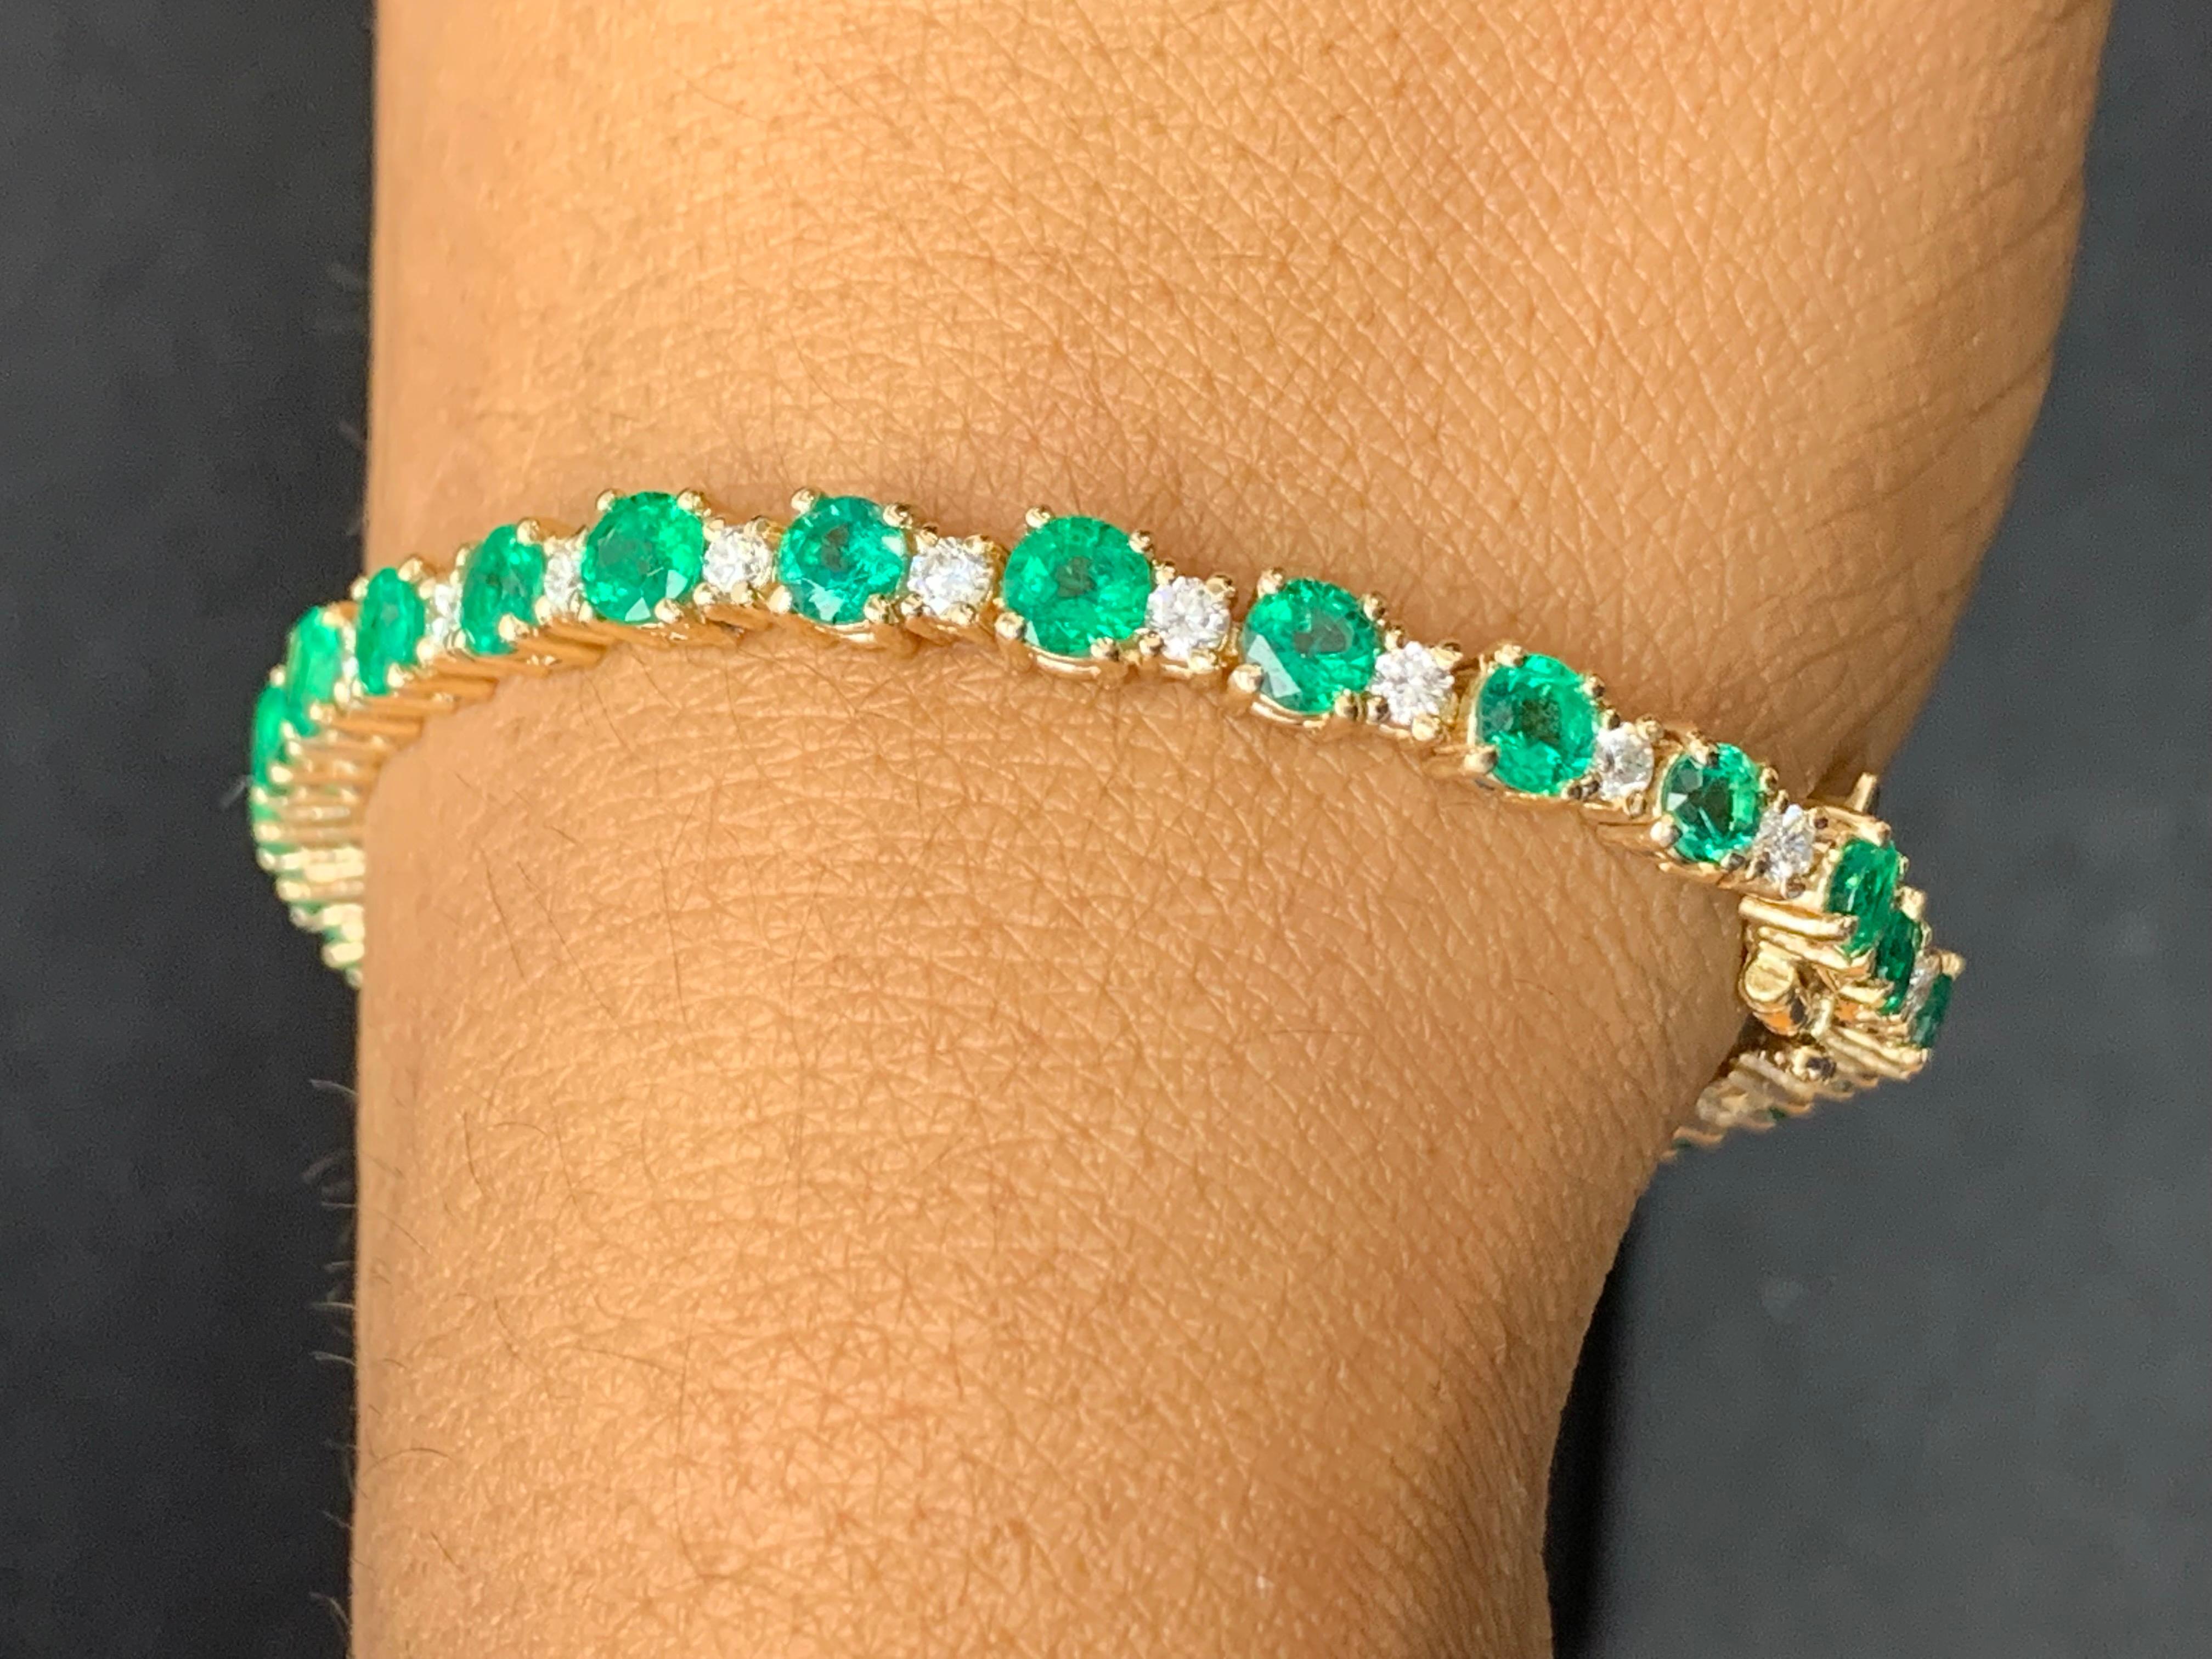 Showcasing 6.70 carats total of 28 green emeralds, elegantly alternating with 1.40 carats of 28 round brilliant diamonds. Made in 14 karat yellow gold.

Style available in different price ranges. Prices are based on your selection of the 4C’s